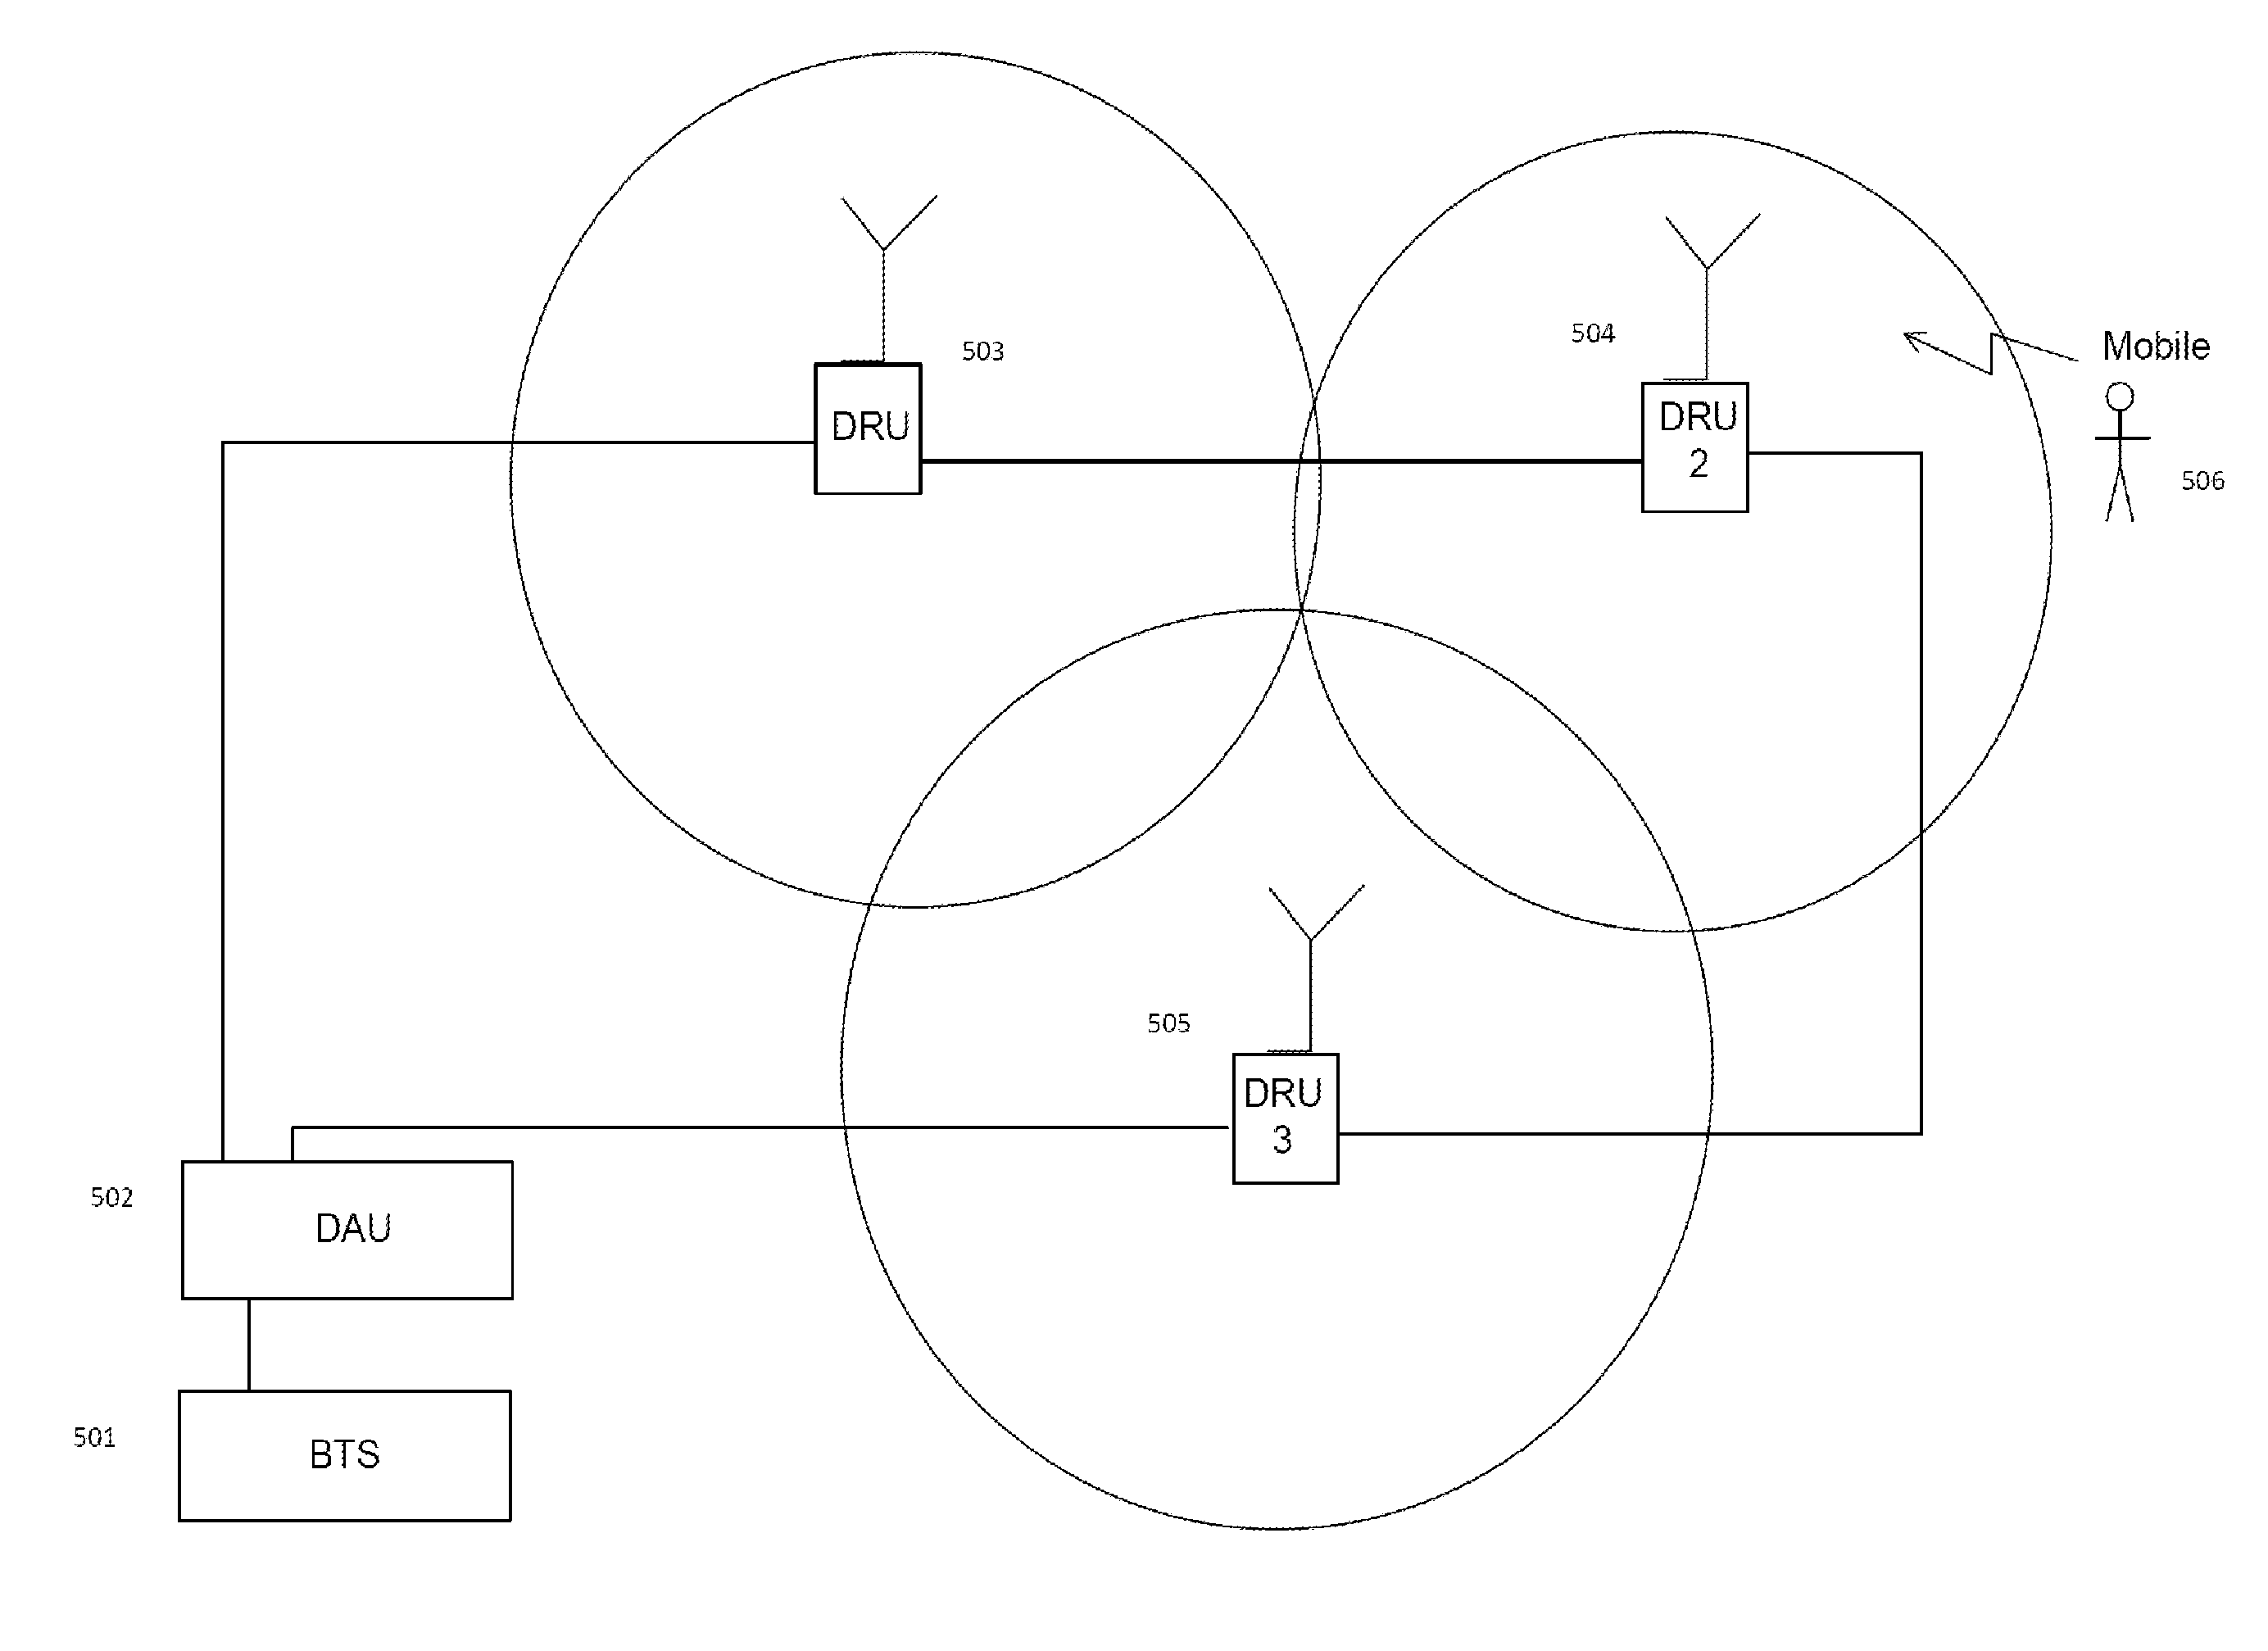 Daisy-Chained Ring of Remote Units For A Distributed Antenna System